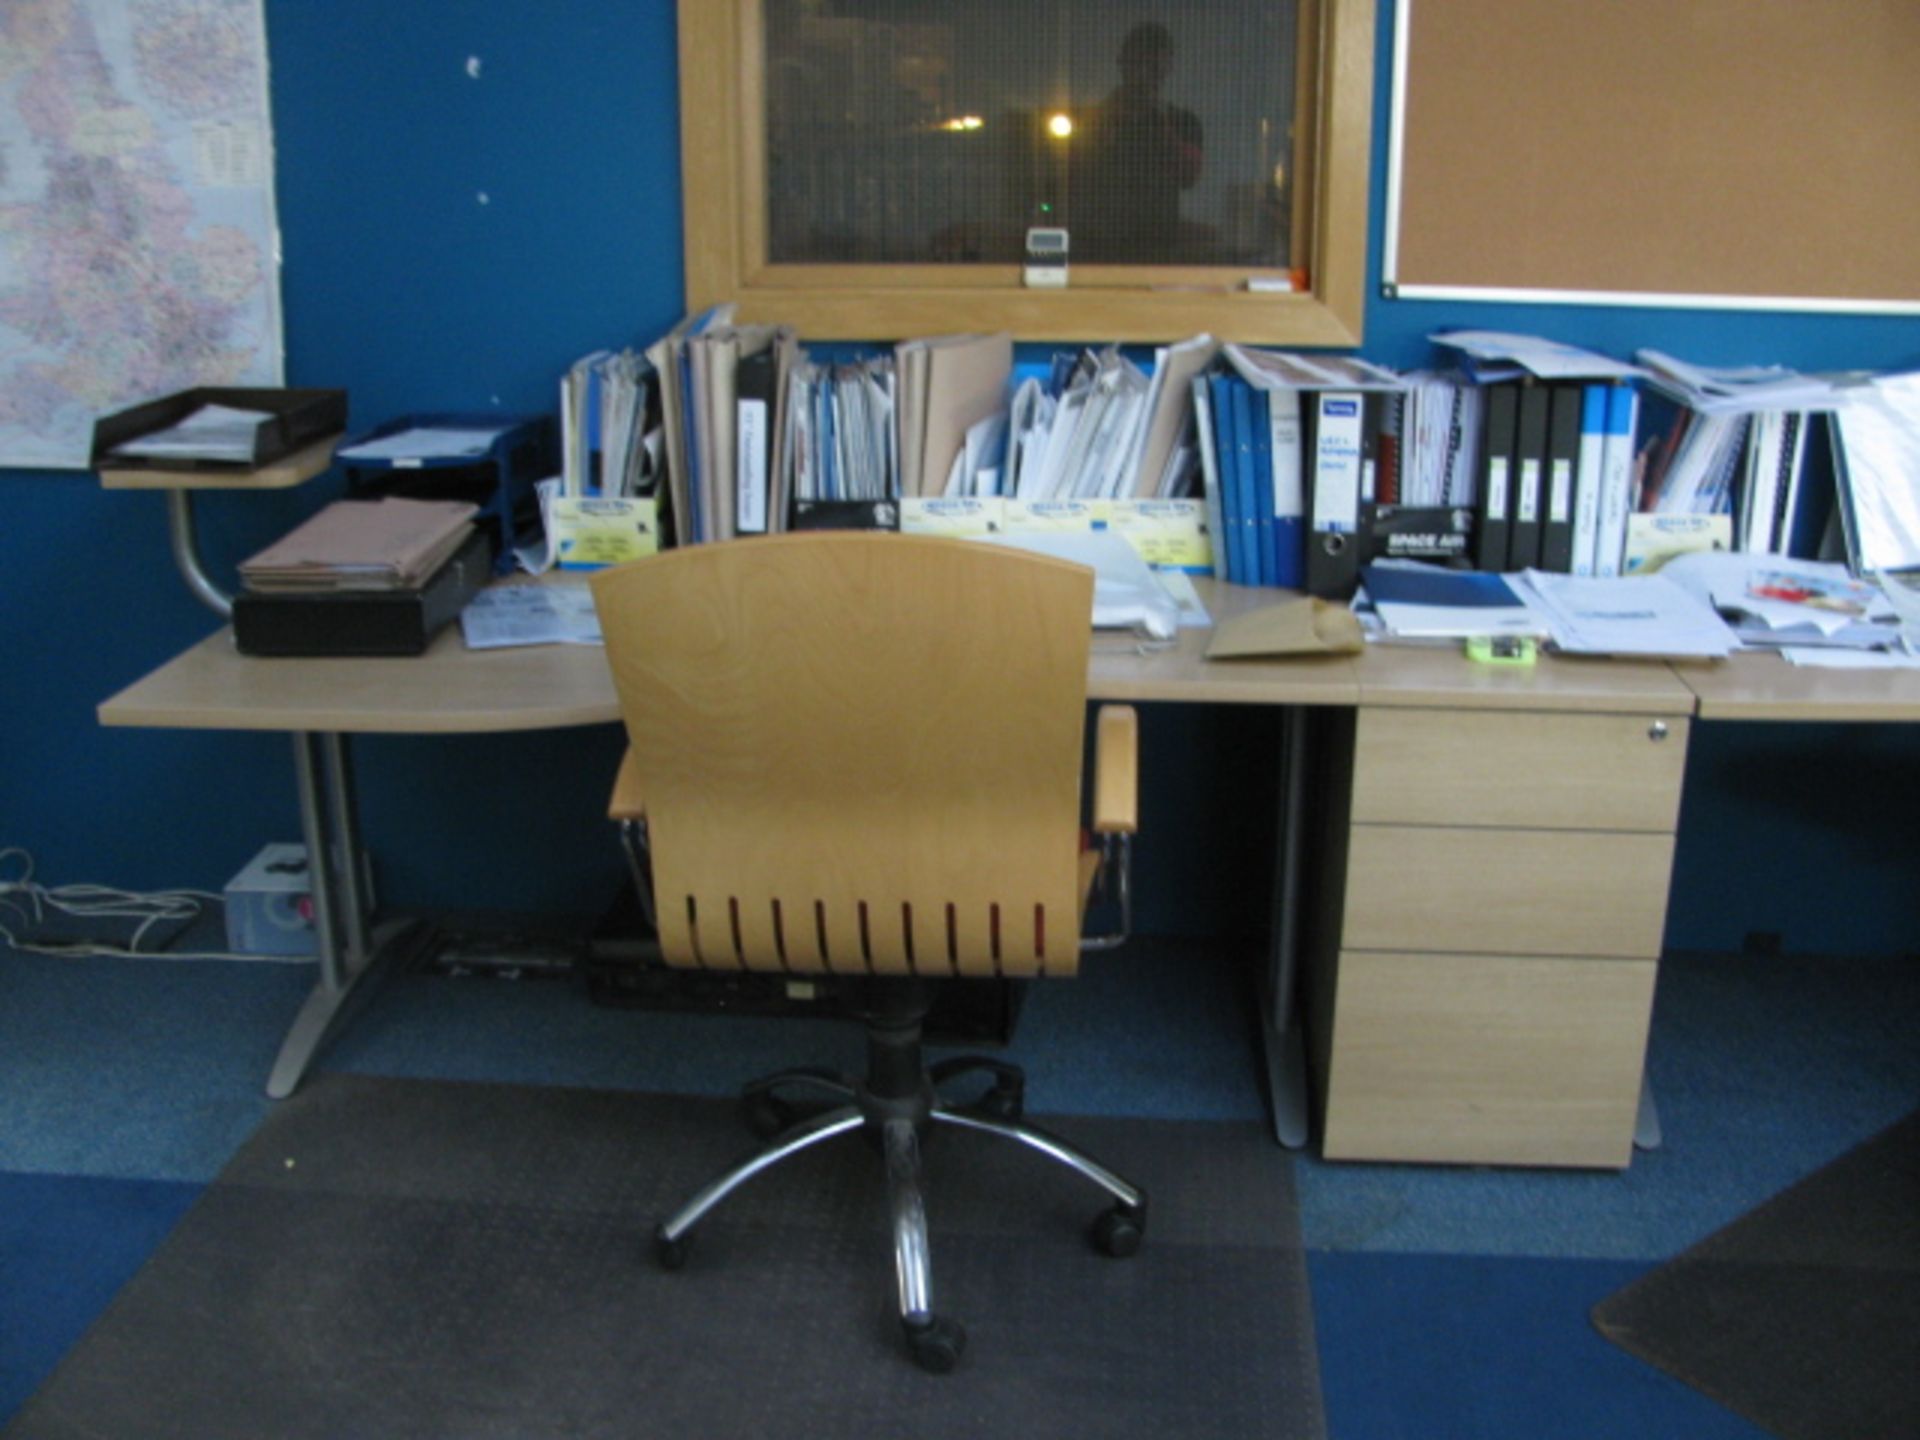 2 light oak veneer workstations with pedestals and gas operated chair - Image 2 of 2